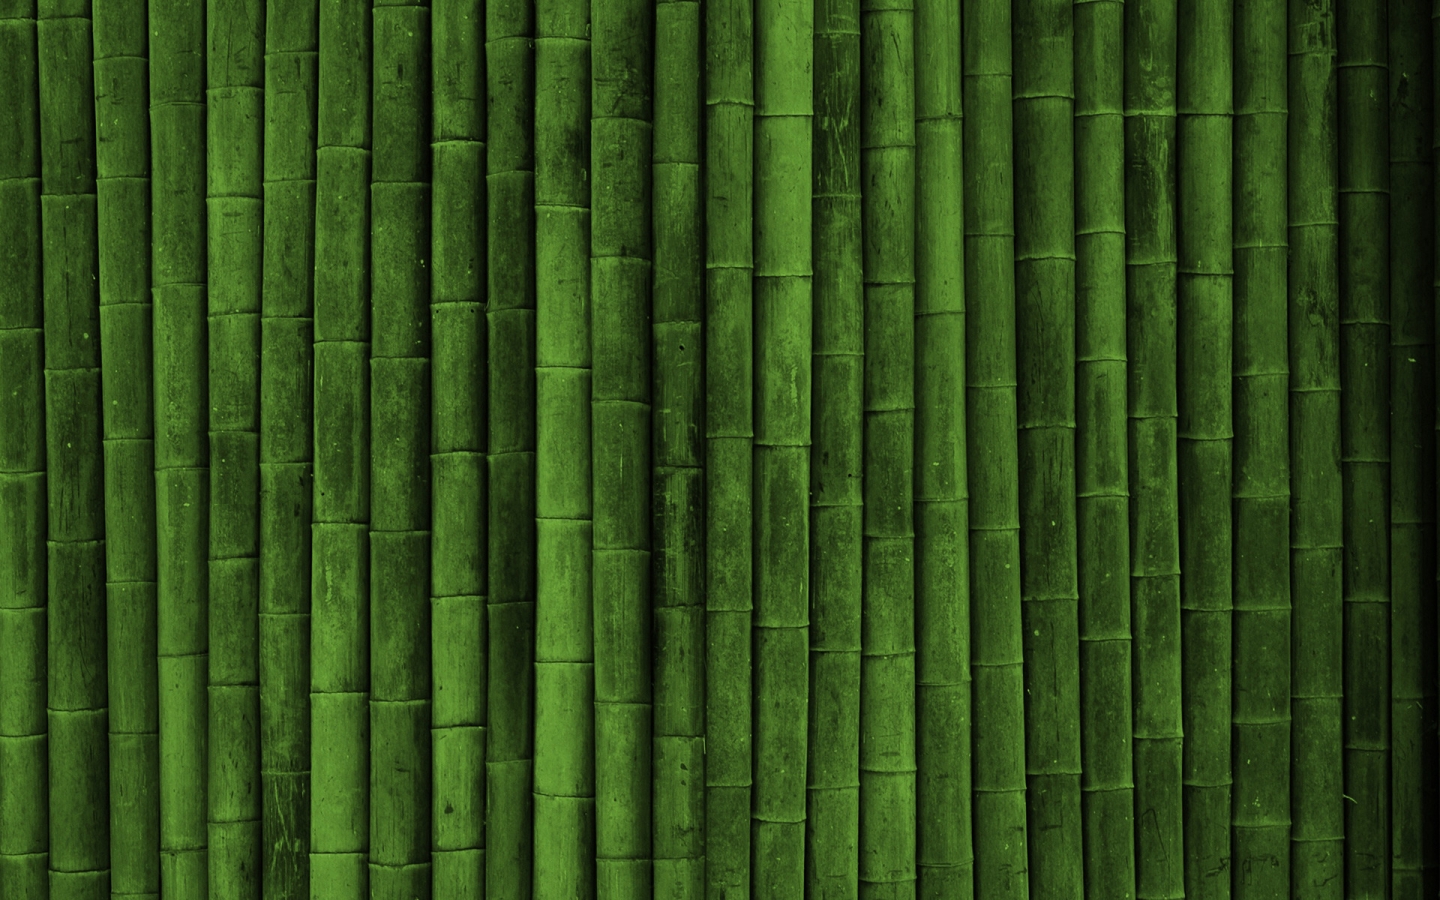 Bamboo for 1440 x 900 widescreen resolution